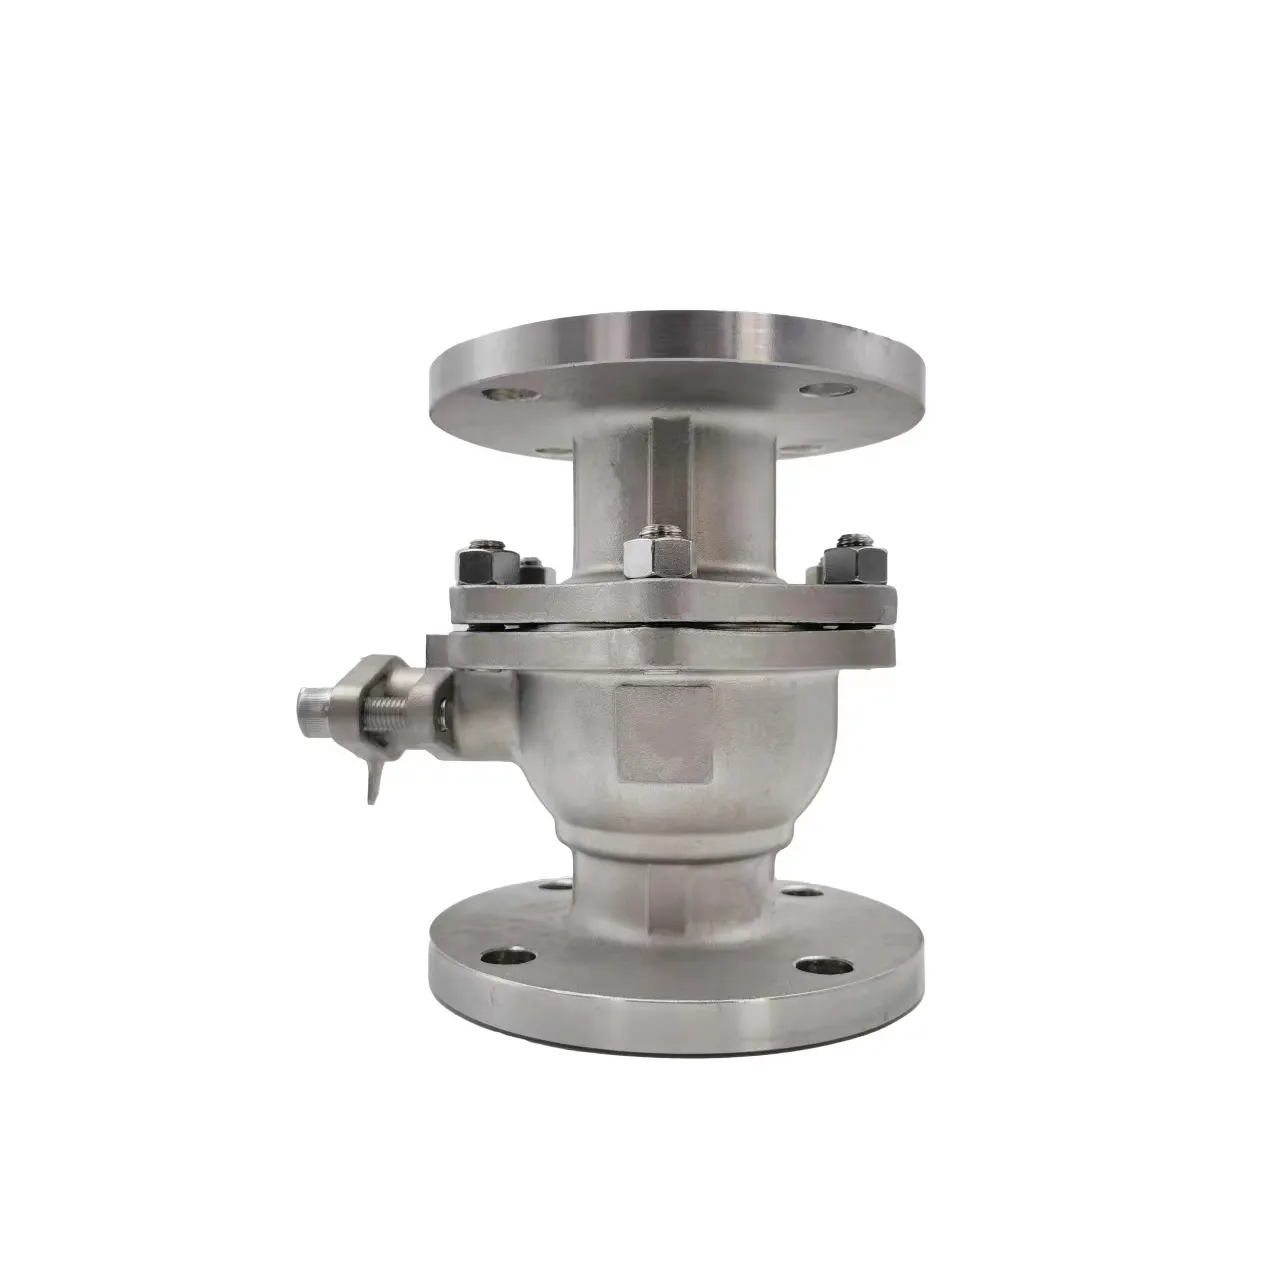 Manufacturer's stainless steel ss304 ss316 carbon steel A216 WCB flanged end 2pc 150lb ball valve factory price